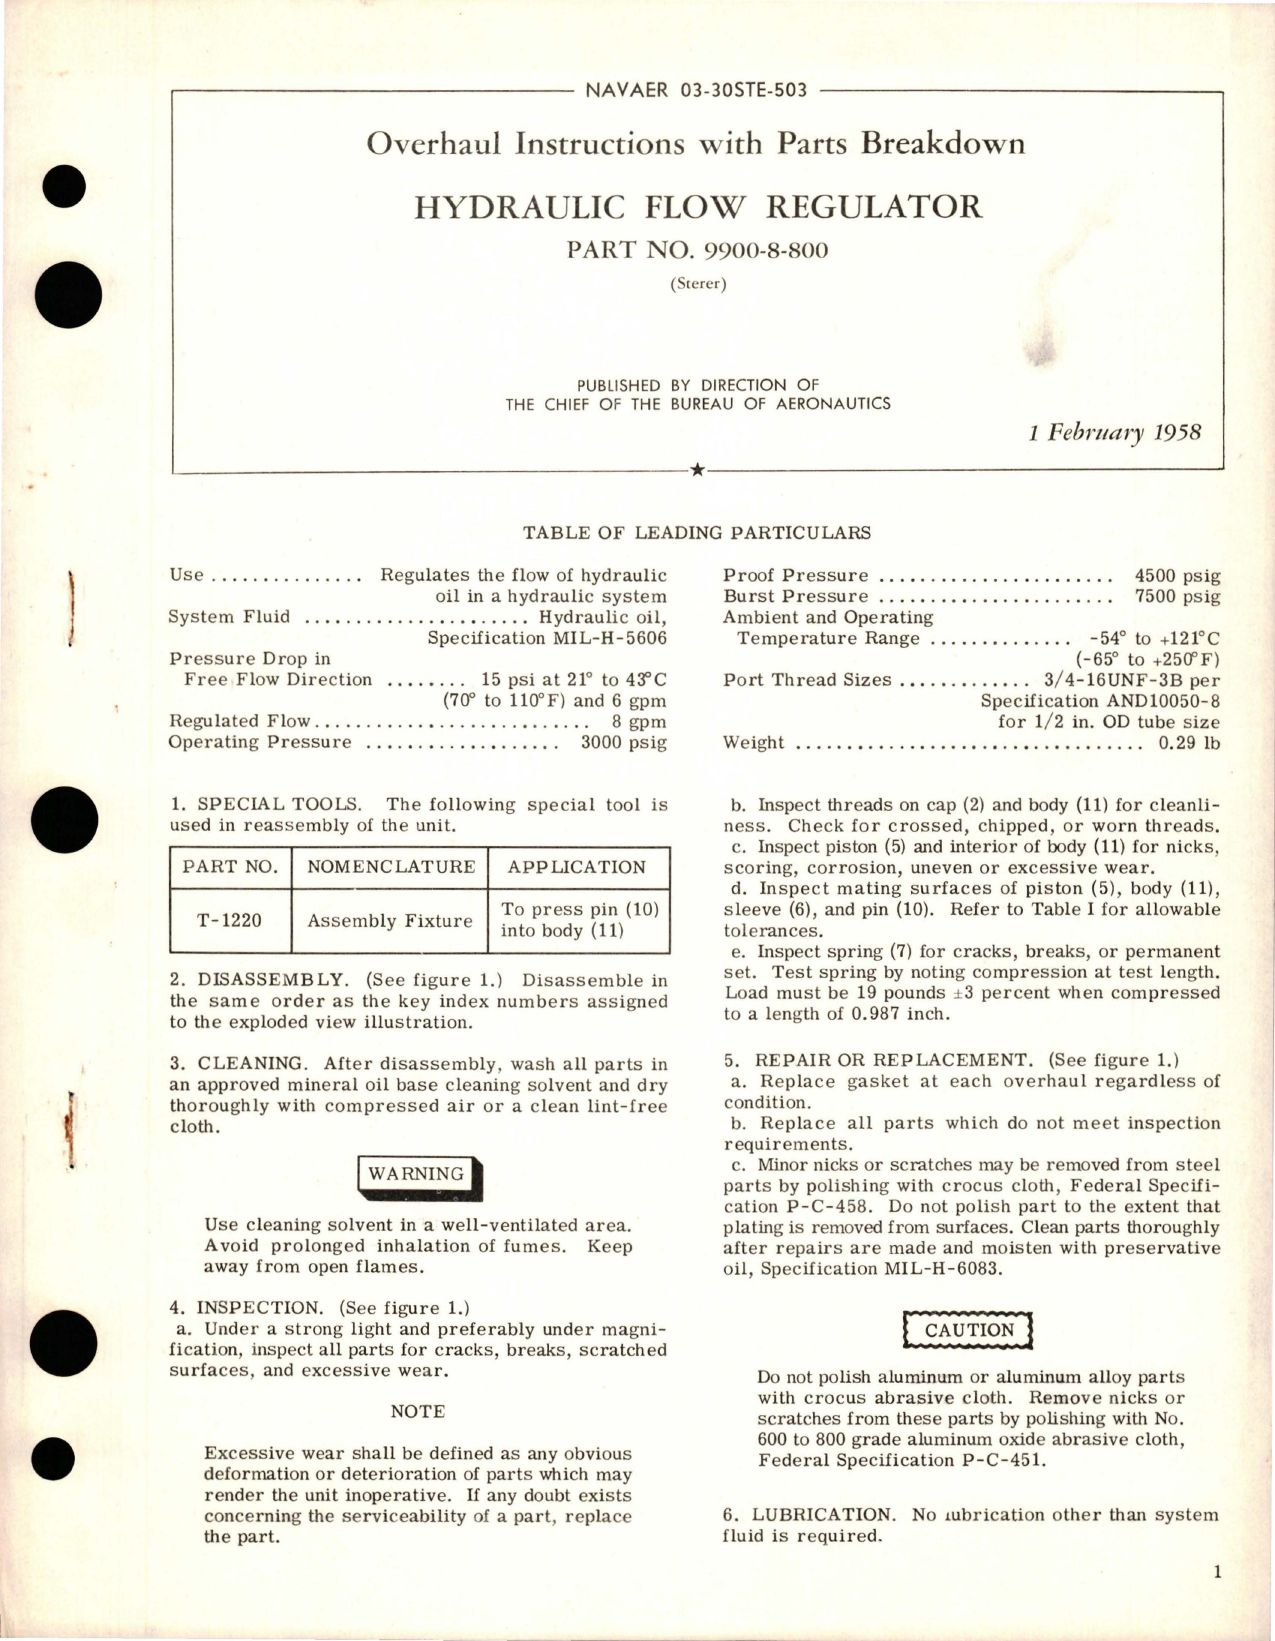 Sample page 1 from AirCorps Library document: Overhaul Instructions with Parts Breakdown for Hydraulic Flow Regulator - Part 9900-8-800